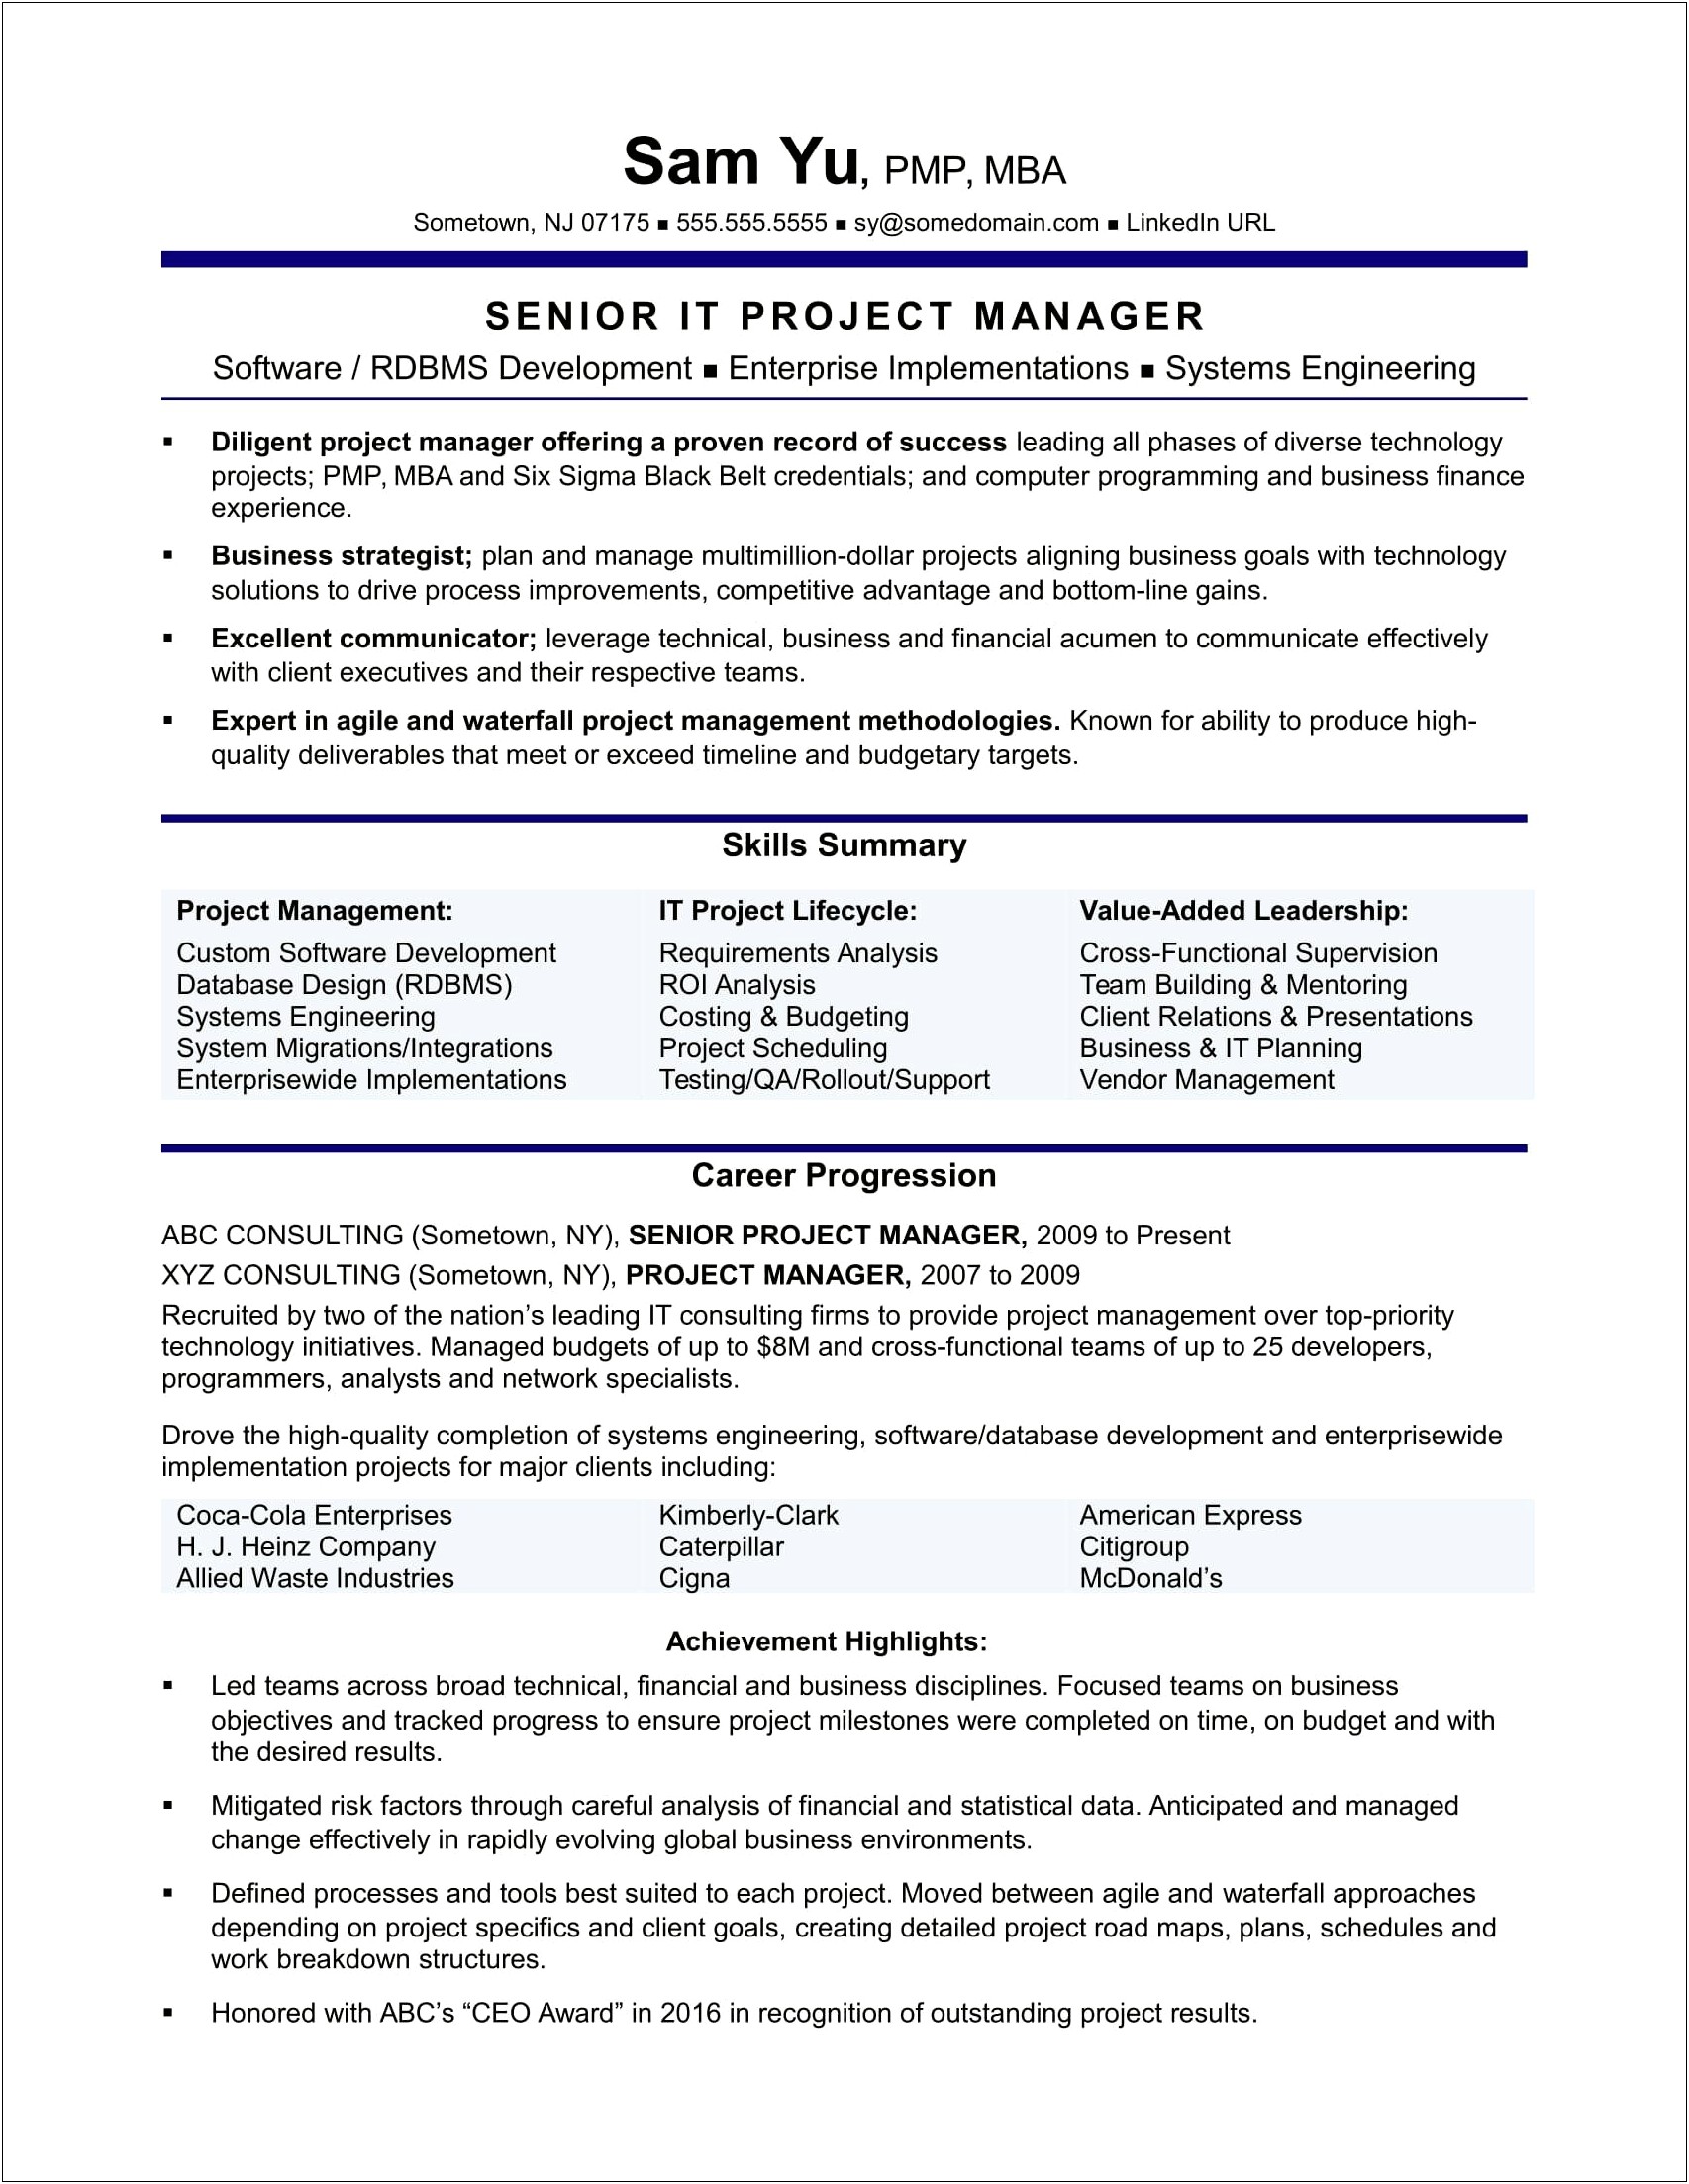 Resume Skills Examples Of Vehicle Finance Manager